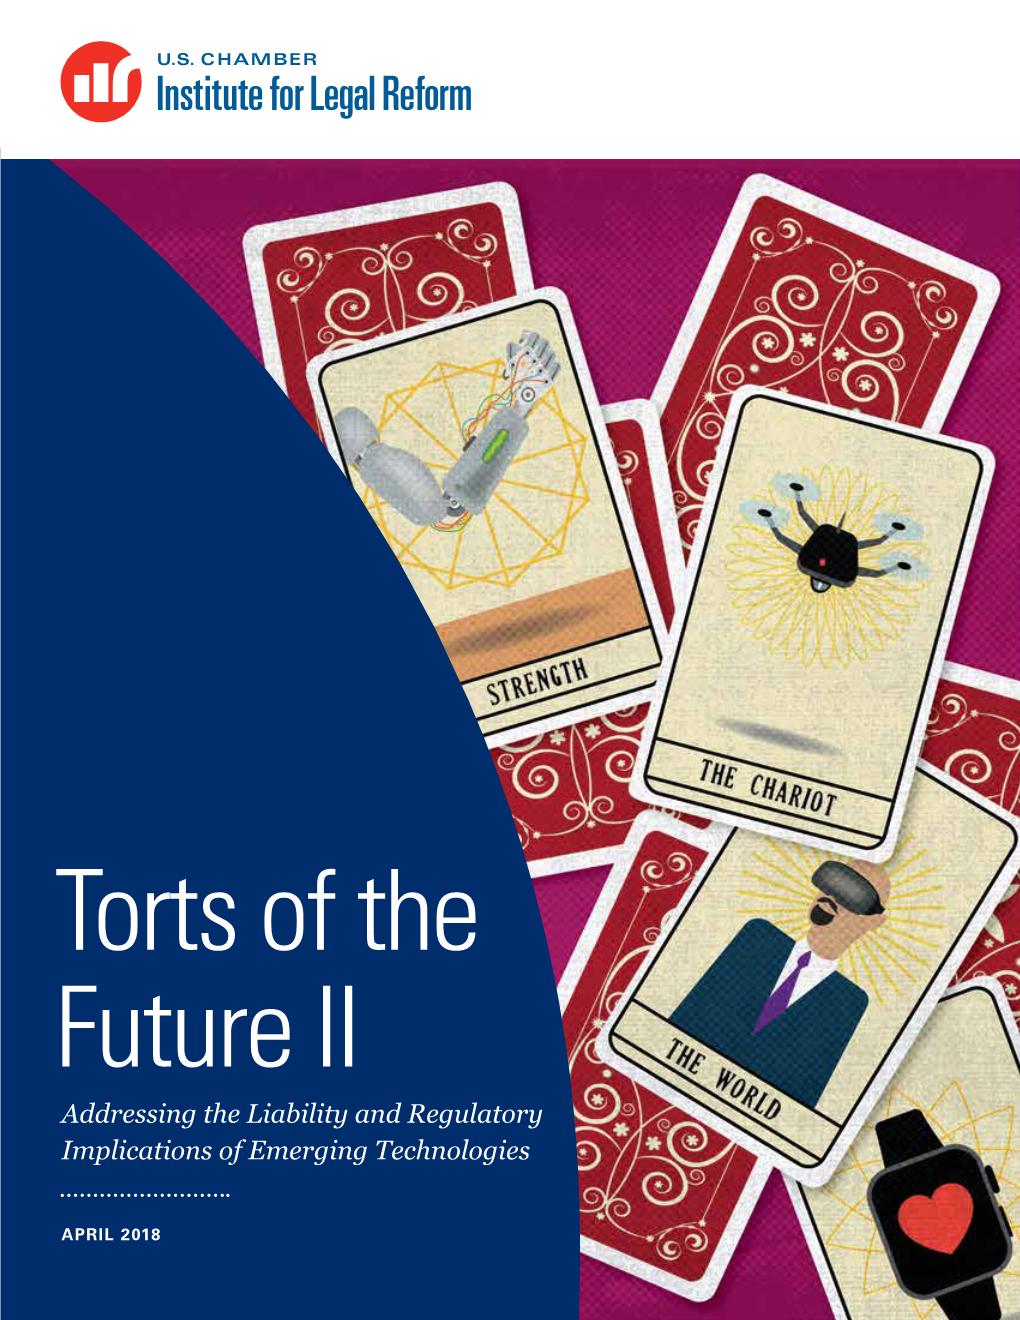 Torts of the Future II Addressing the Liability and Regulatory Implications of Emerging Technologies